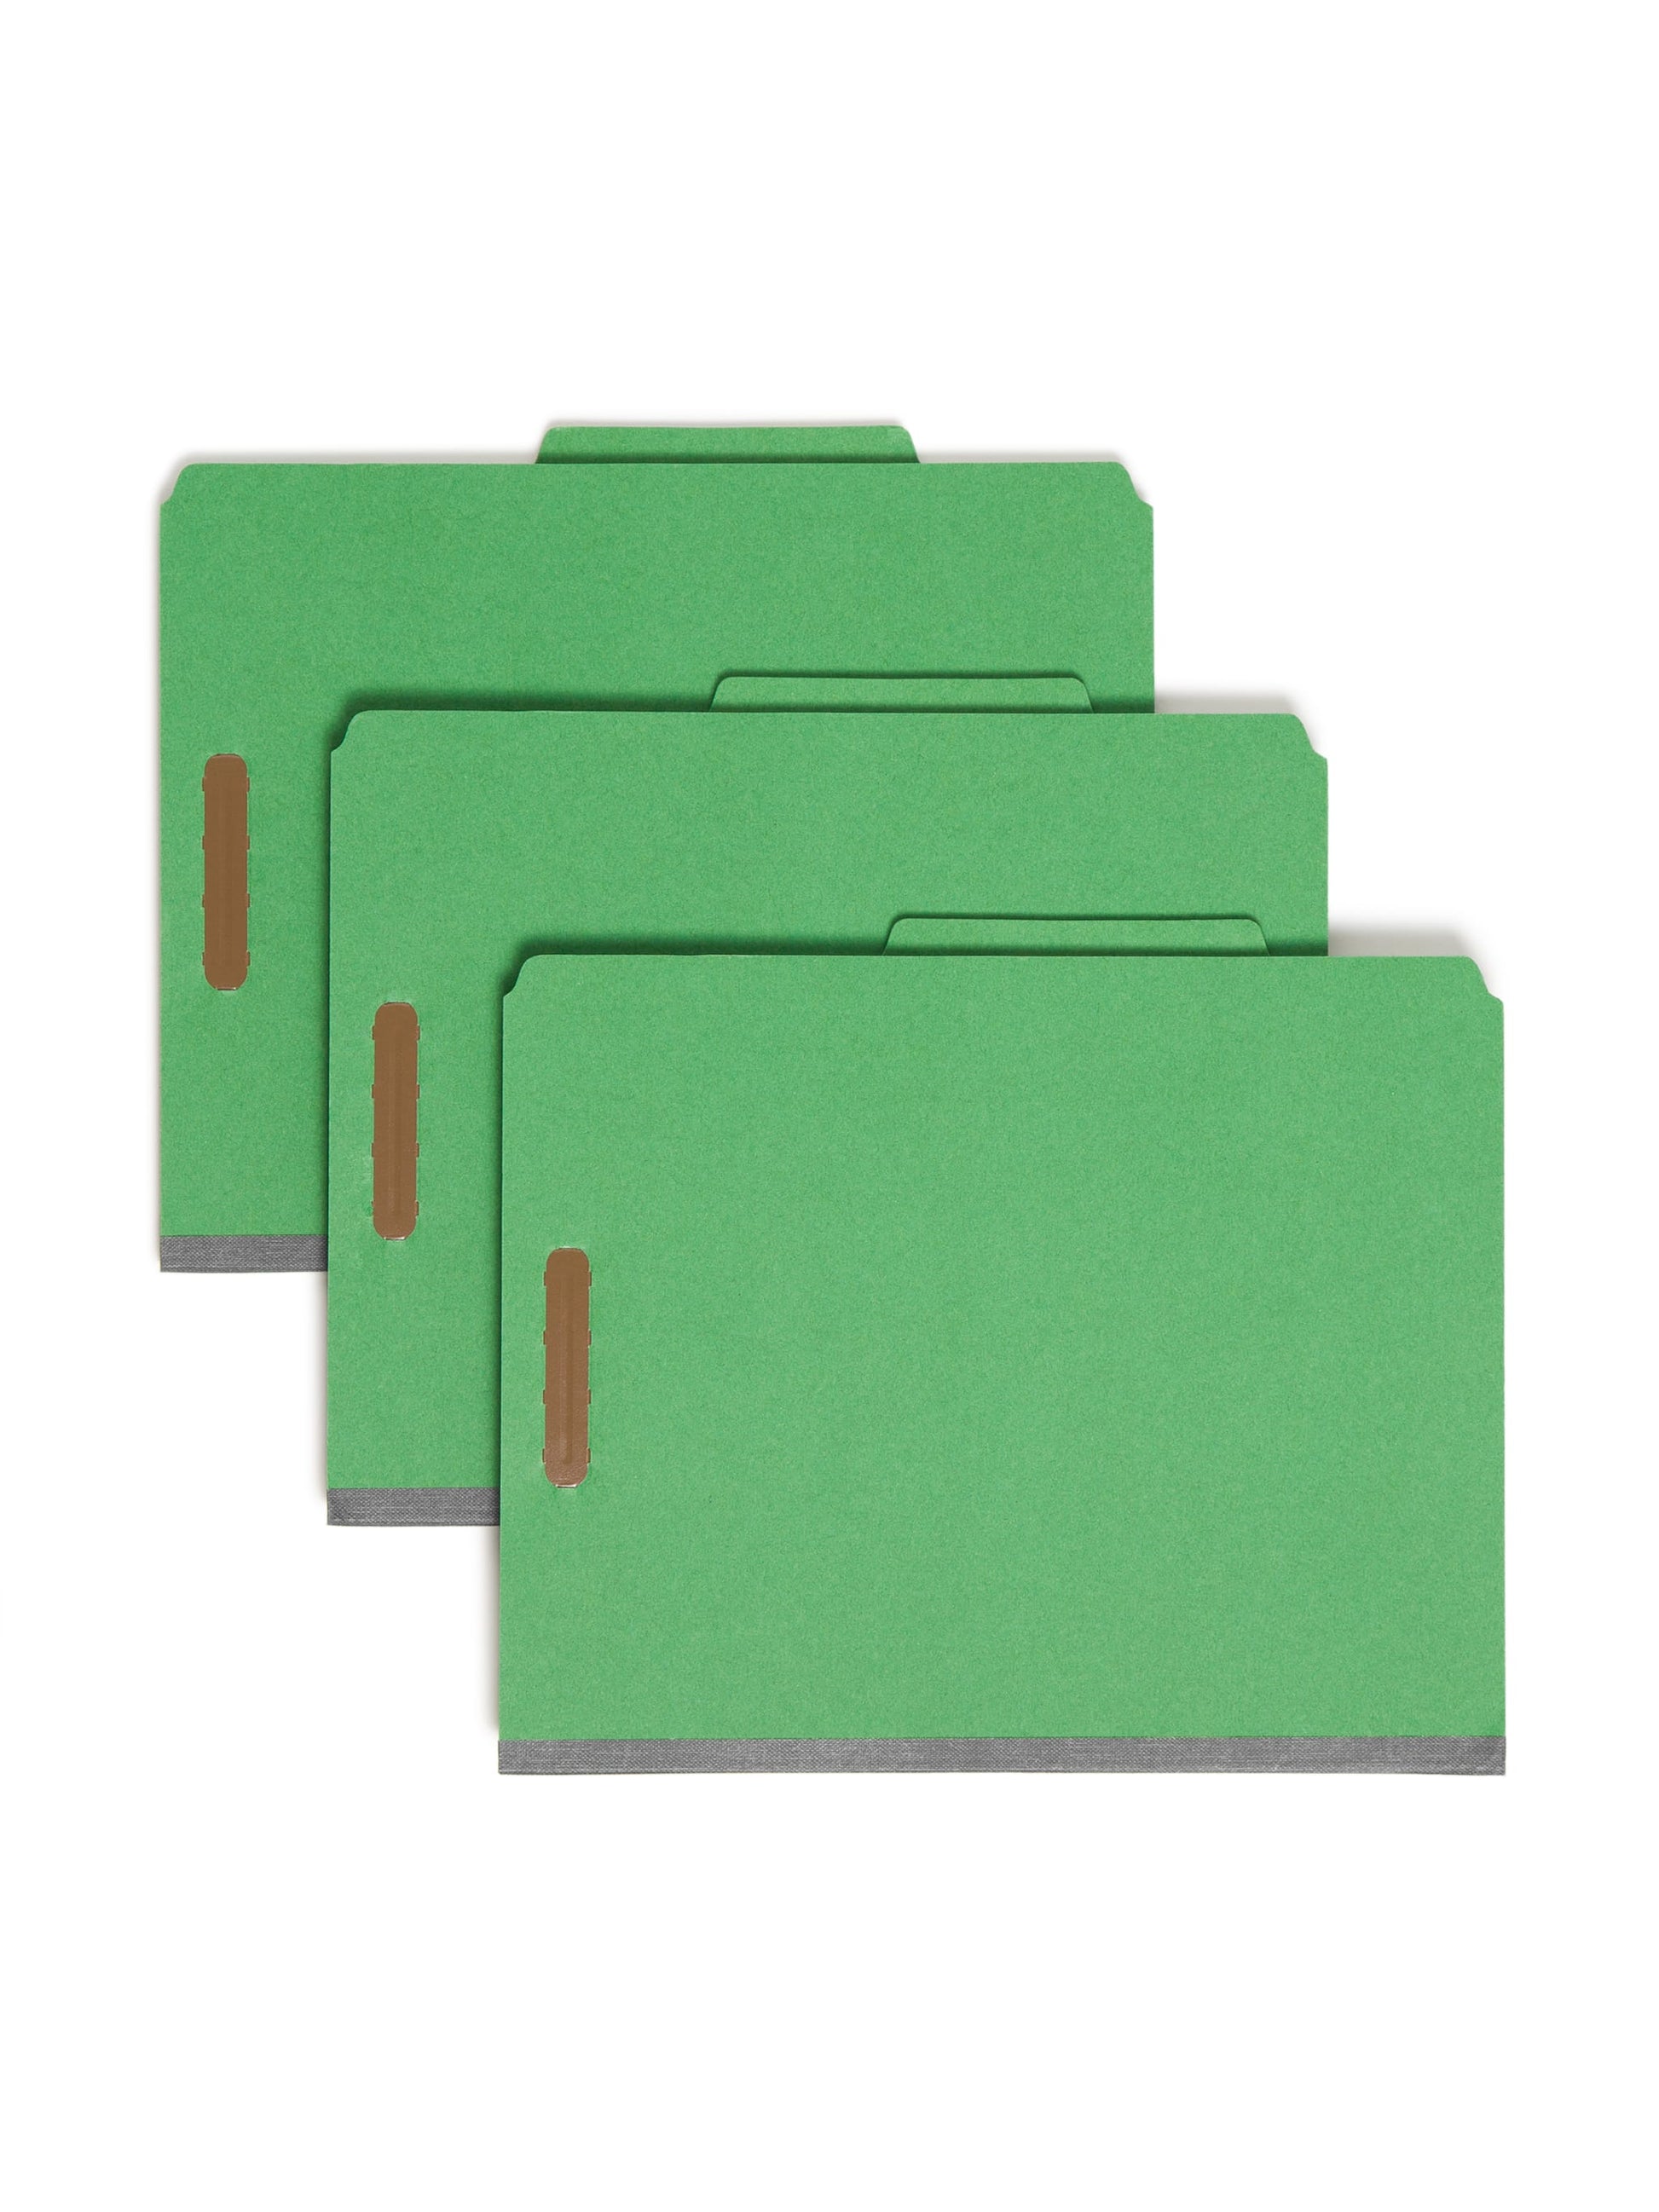 100% Recycled Value Pressboard Classification Folders, 2 Dividers, 2 inch Expansion, 2/5-Cut Tab, 2 Fasteners, Green Color, Letter Size, Set of 0, 30086486211865